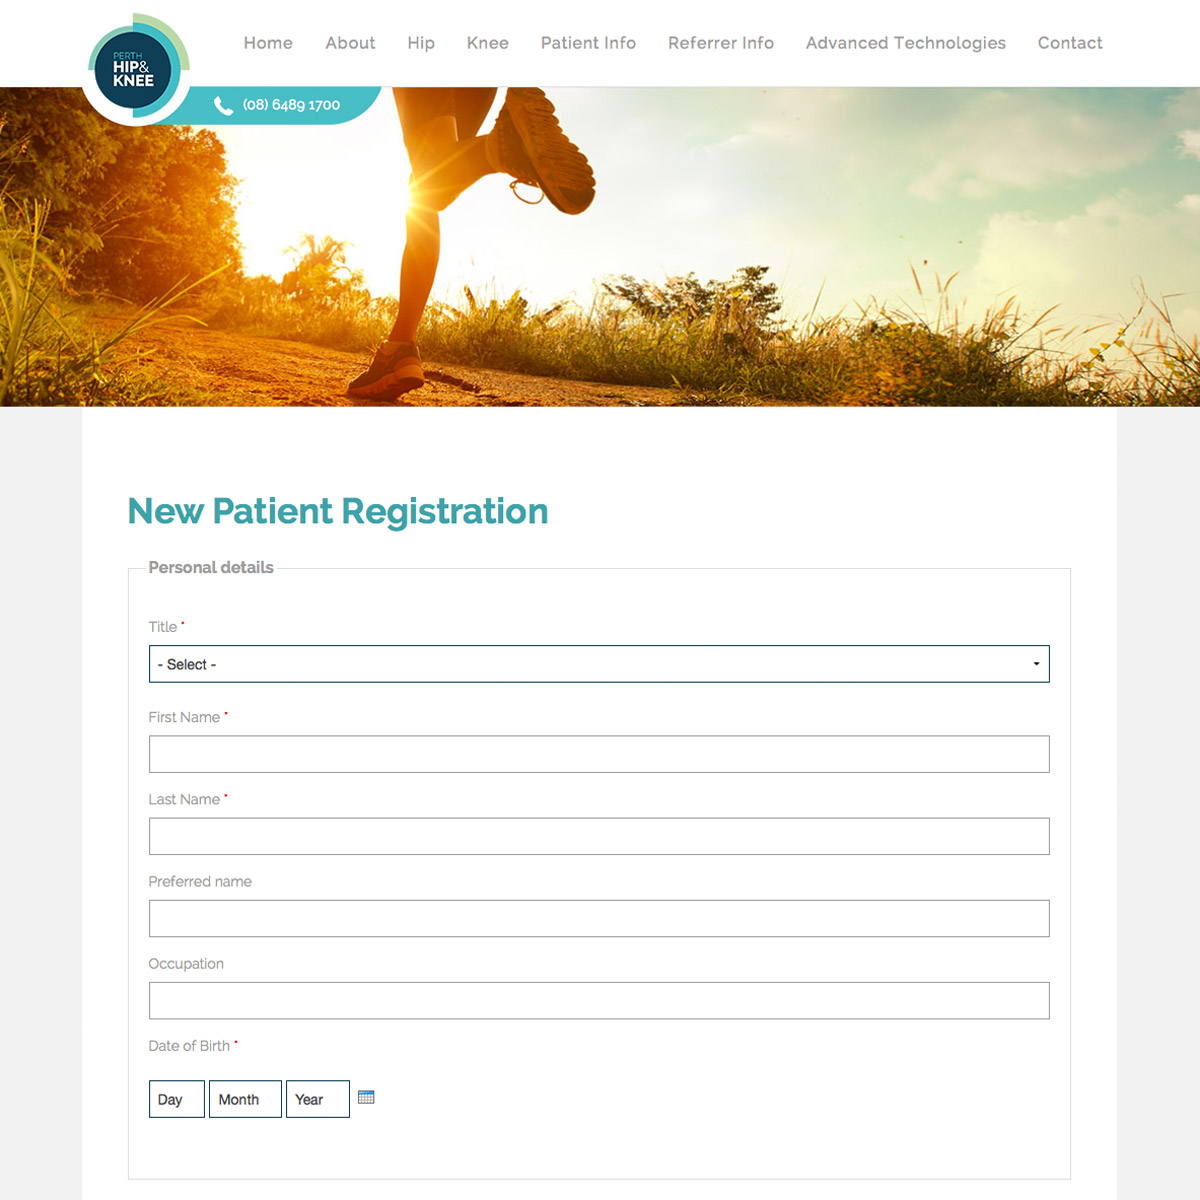 Perth Hip and Knee New Patient Registration